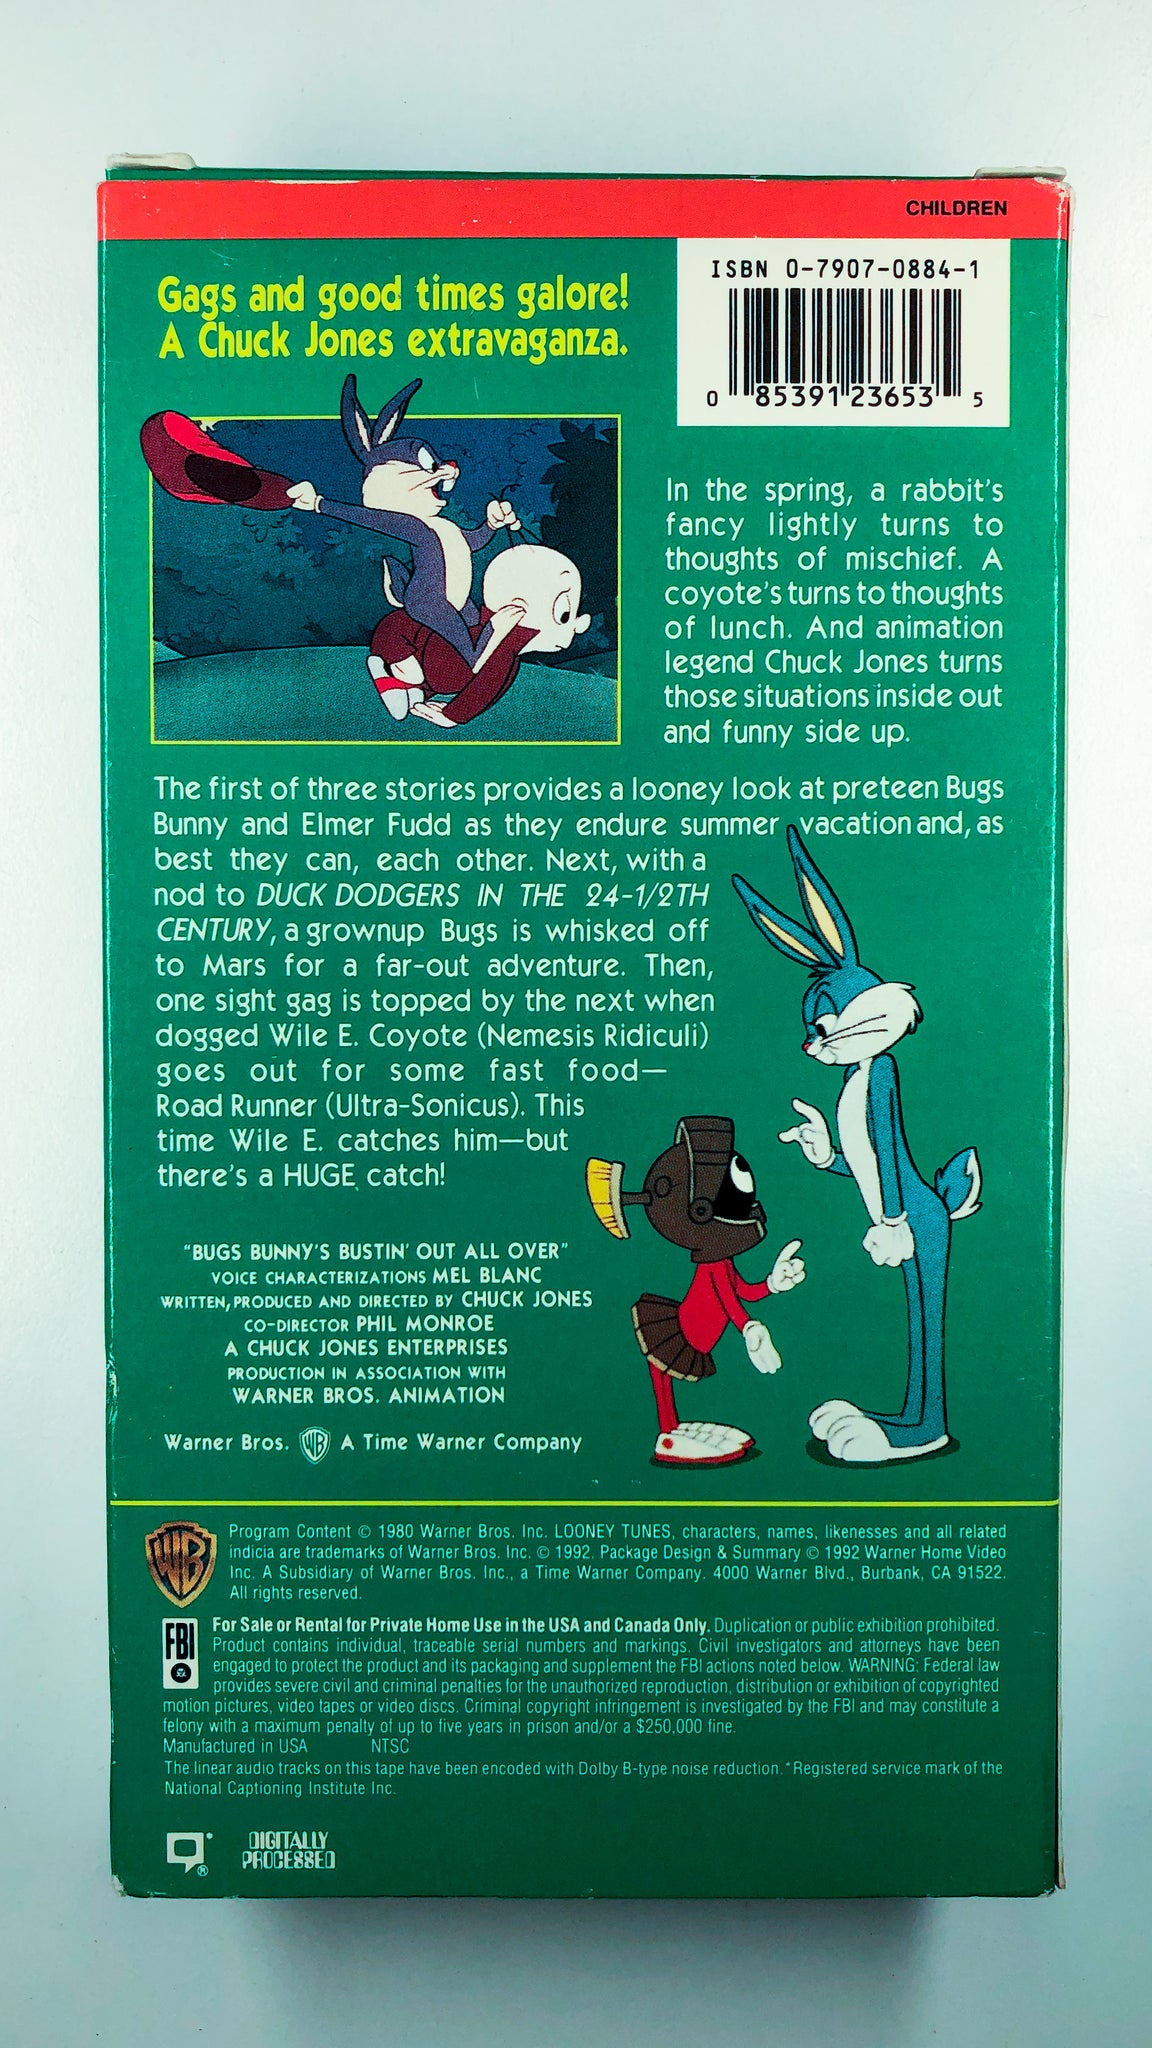 Bugs Bunny's Bustin' Out All Over – WHAMMY! Analog Media